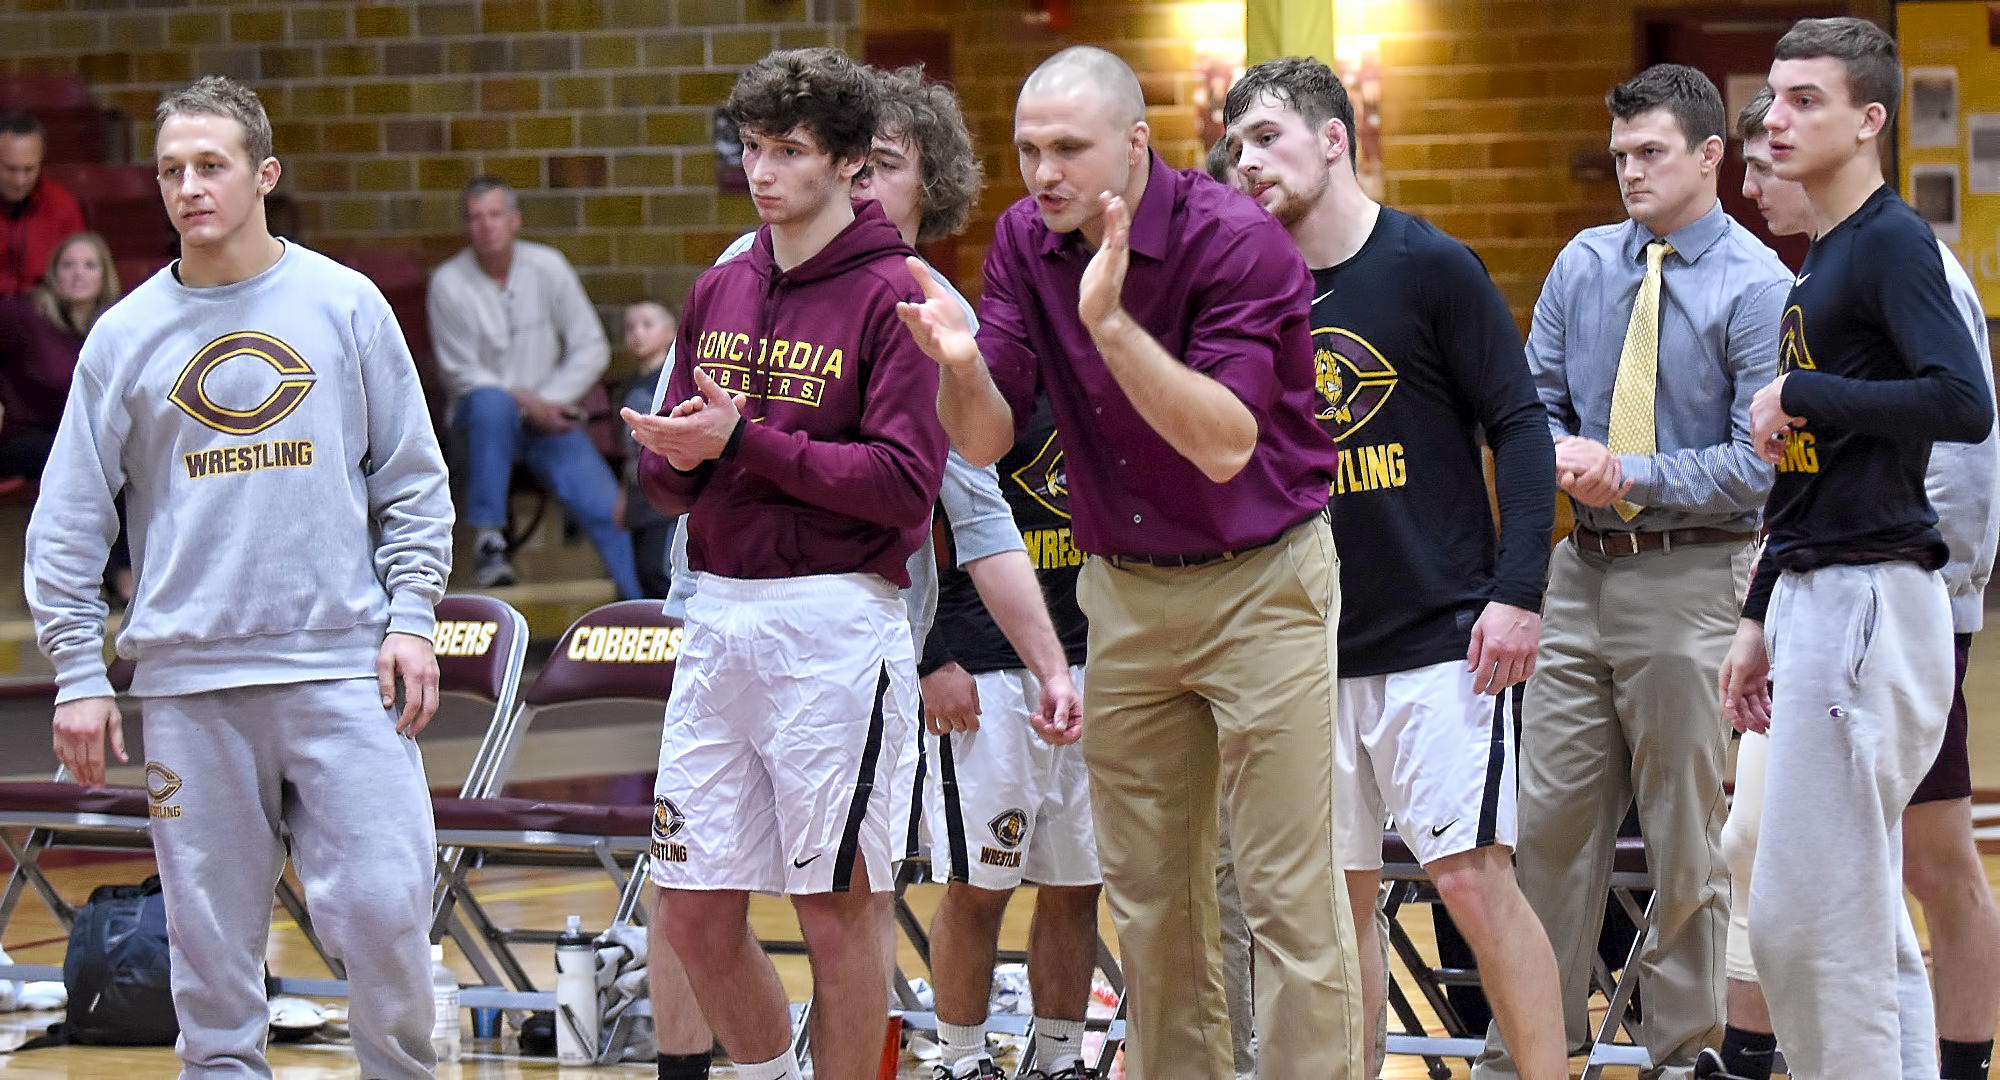 The Cobber wrestling team is now ranked No.22 in Division III.